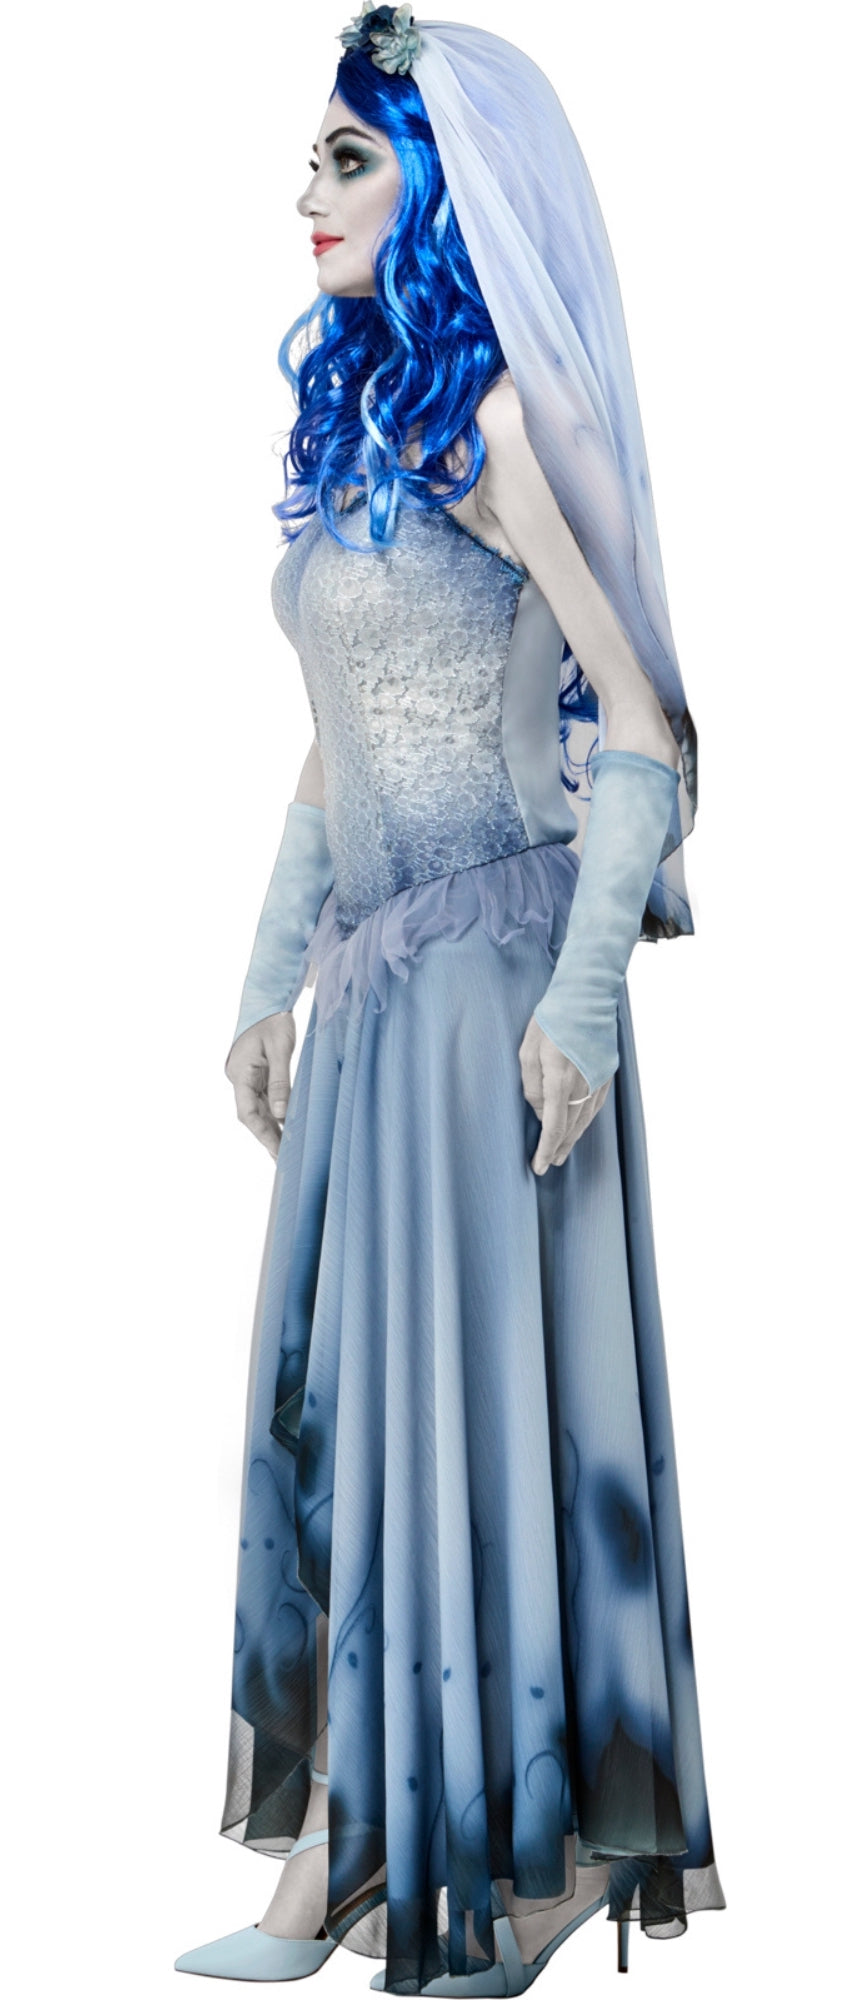 Emily the Corpse Bride | Adult